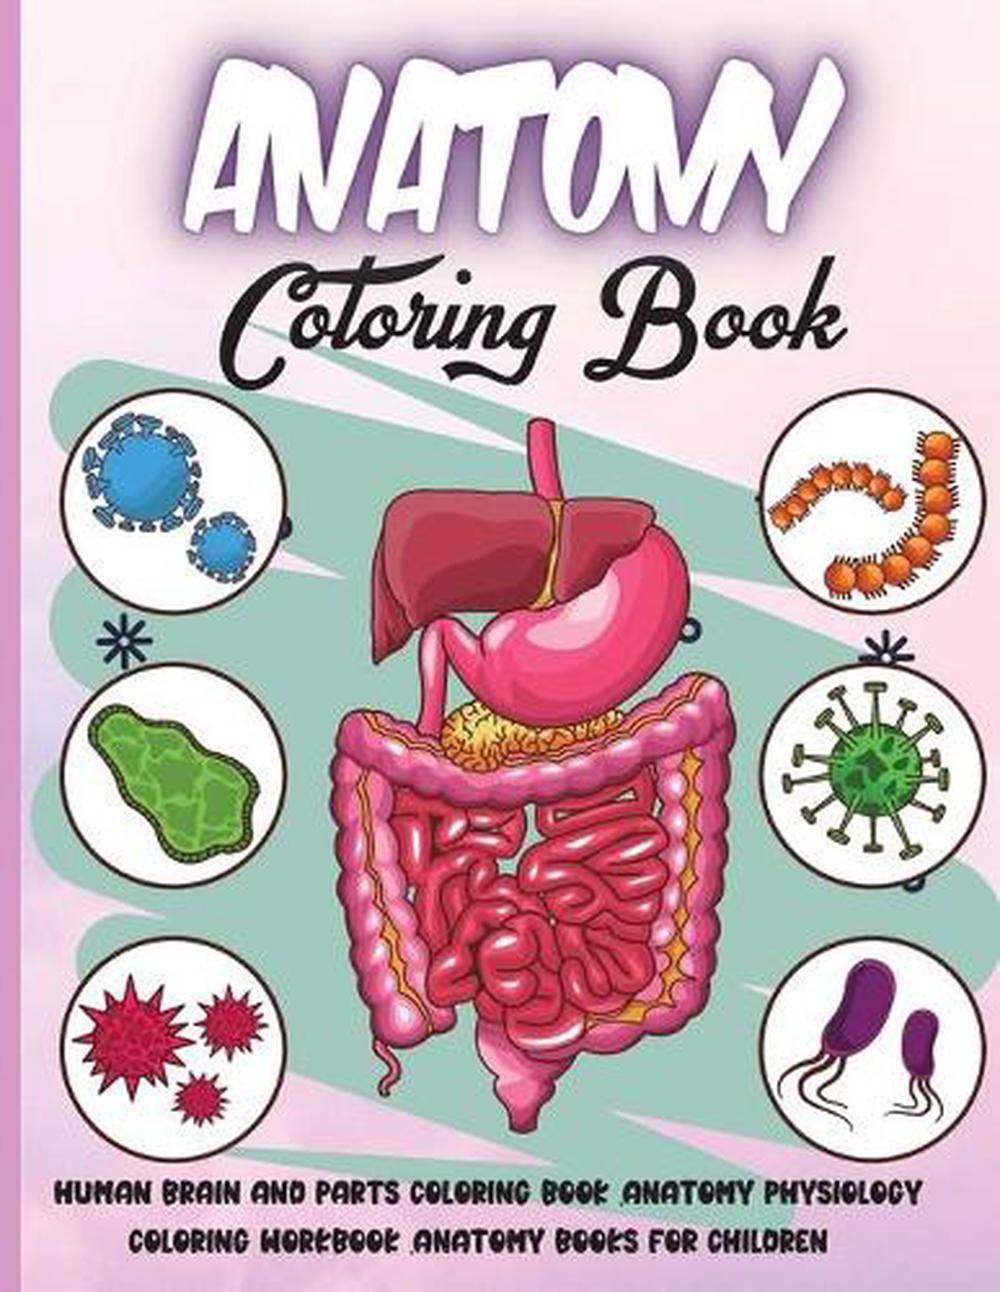 Download Anatomy Coloring Book By Rhea Stokes Paperback 9787739930549 Buy Online At Moby The Great